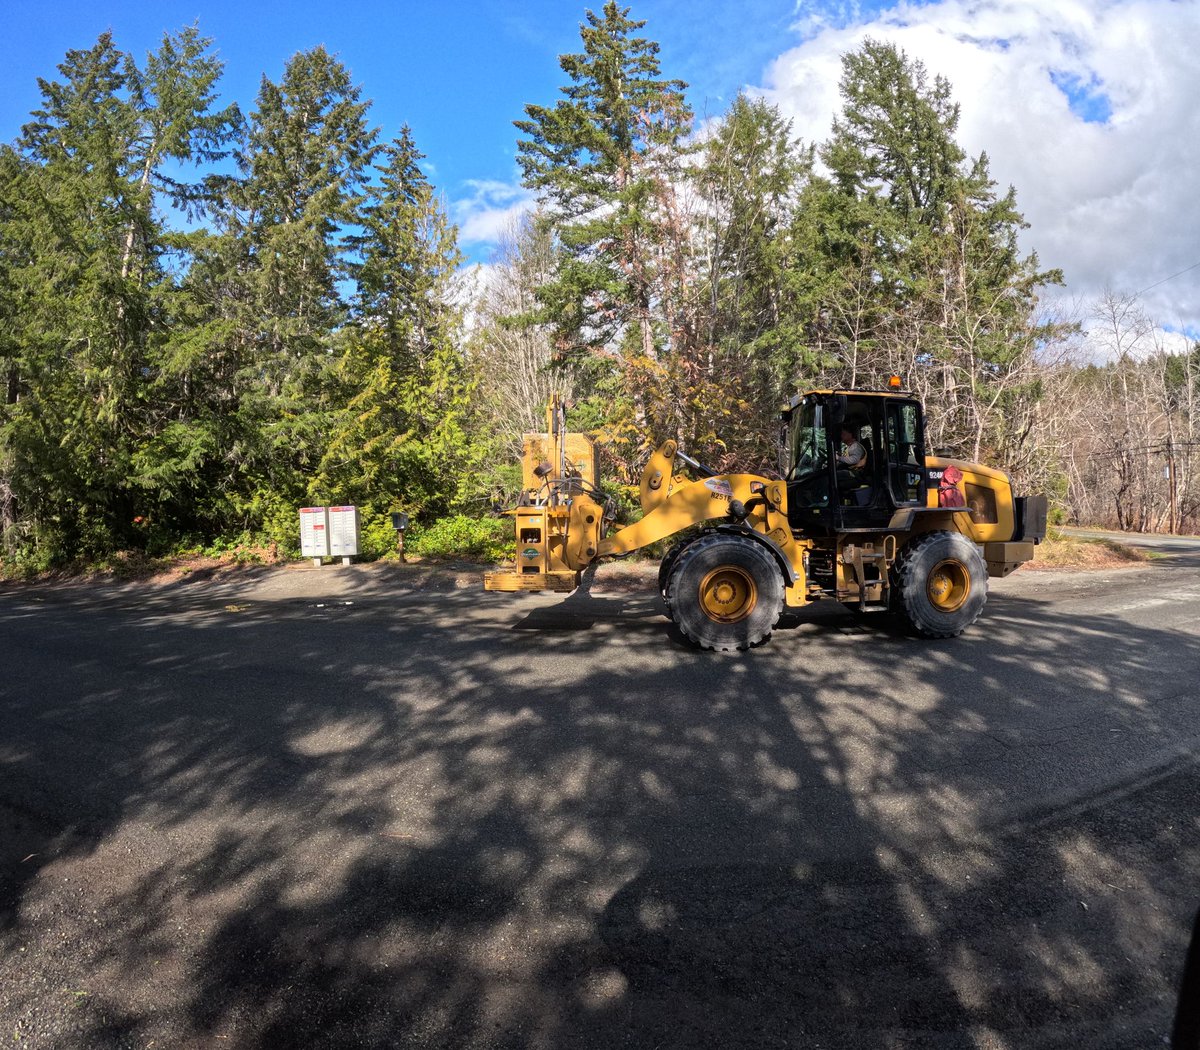 Roadside brushing in the spring and fall seasons helps mitigate disruption of nesting birds on #VanIsle.

Keep an eye out for our crew actively working on local side roads between #DuncanBC and #LakeCowichan.

@TranBCVanIsle #ConeZoneBC